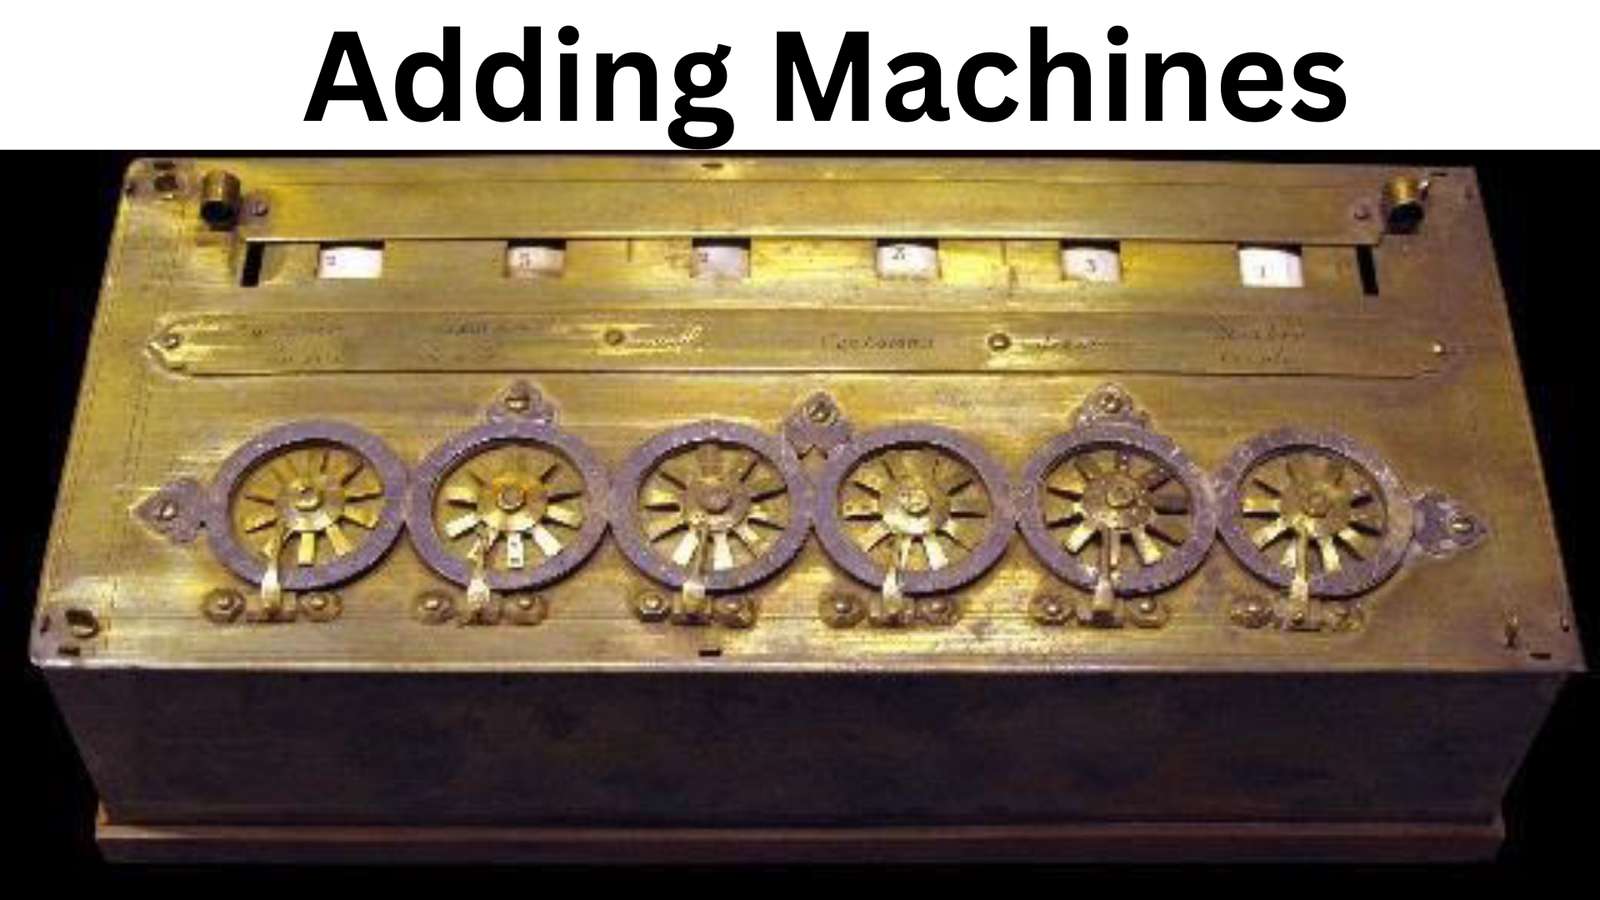 Adding Machines puzzle online from photo